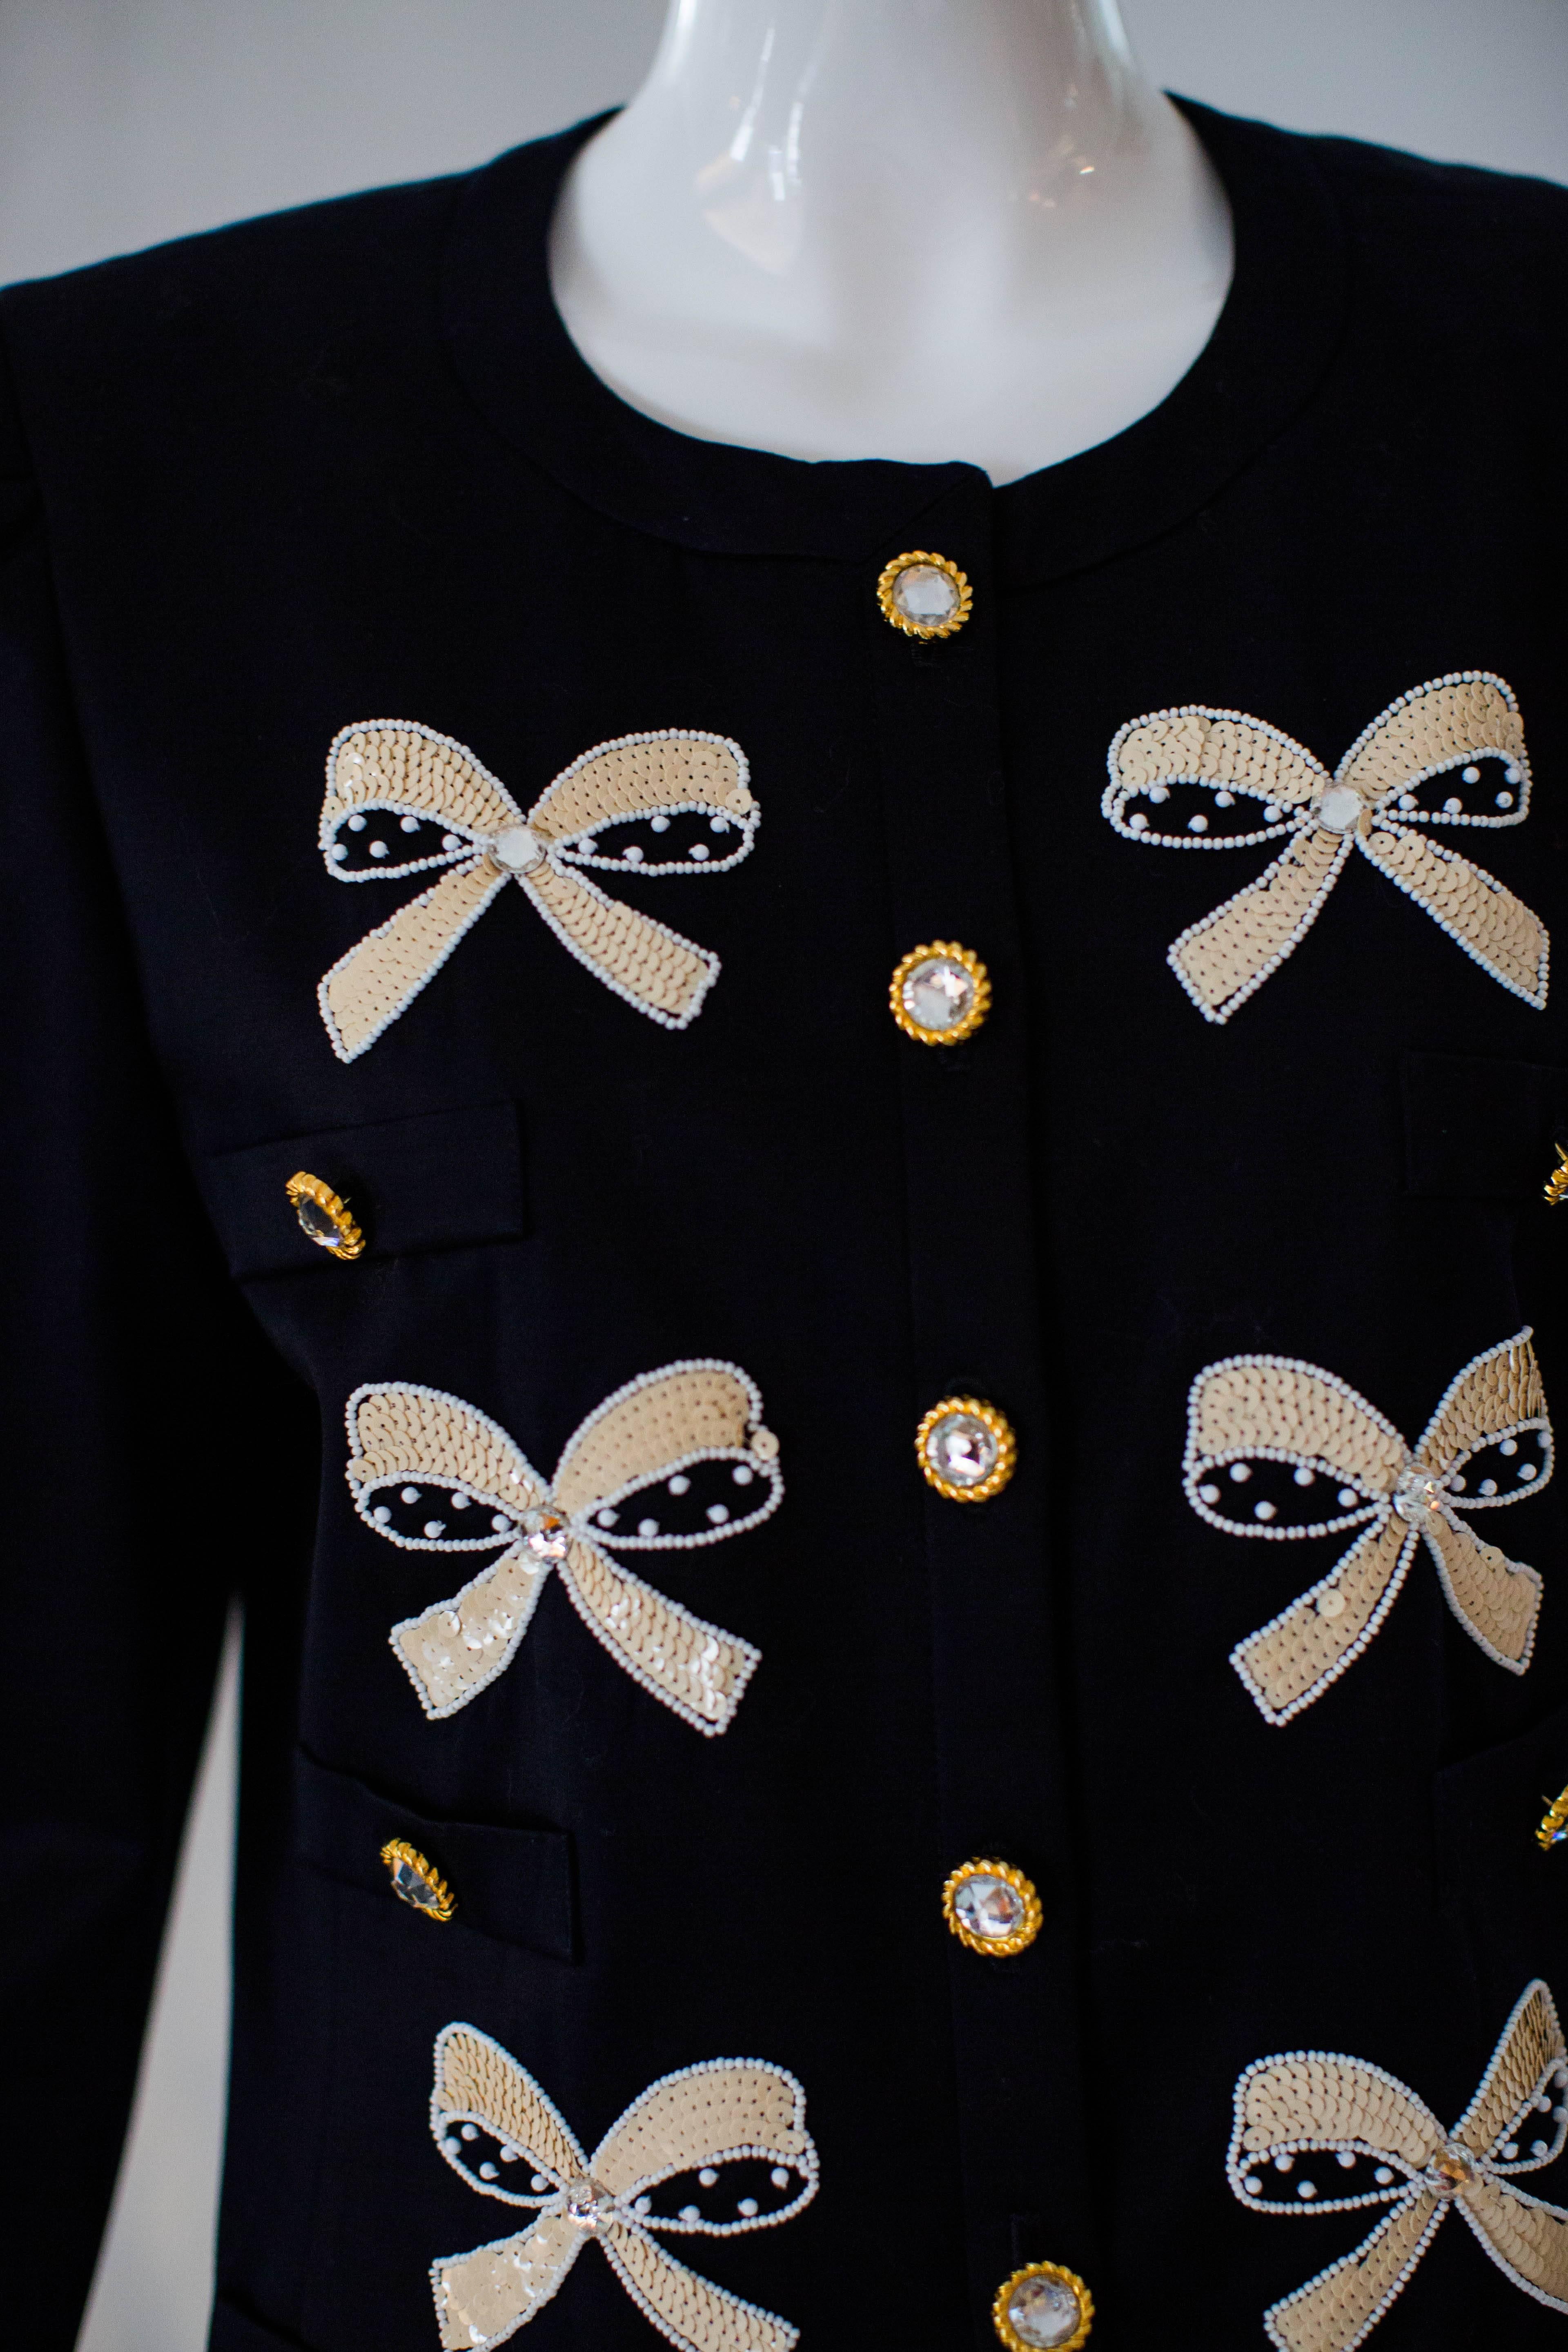 1990s vintage Escada jacket in navy, with a collarless design, long sleeves, darted detail at the shoulder cap, and sequin beaded bows that adorn the front of the jacket with contrasting rhinestone and gold tone buttons. This charming  jacket is a